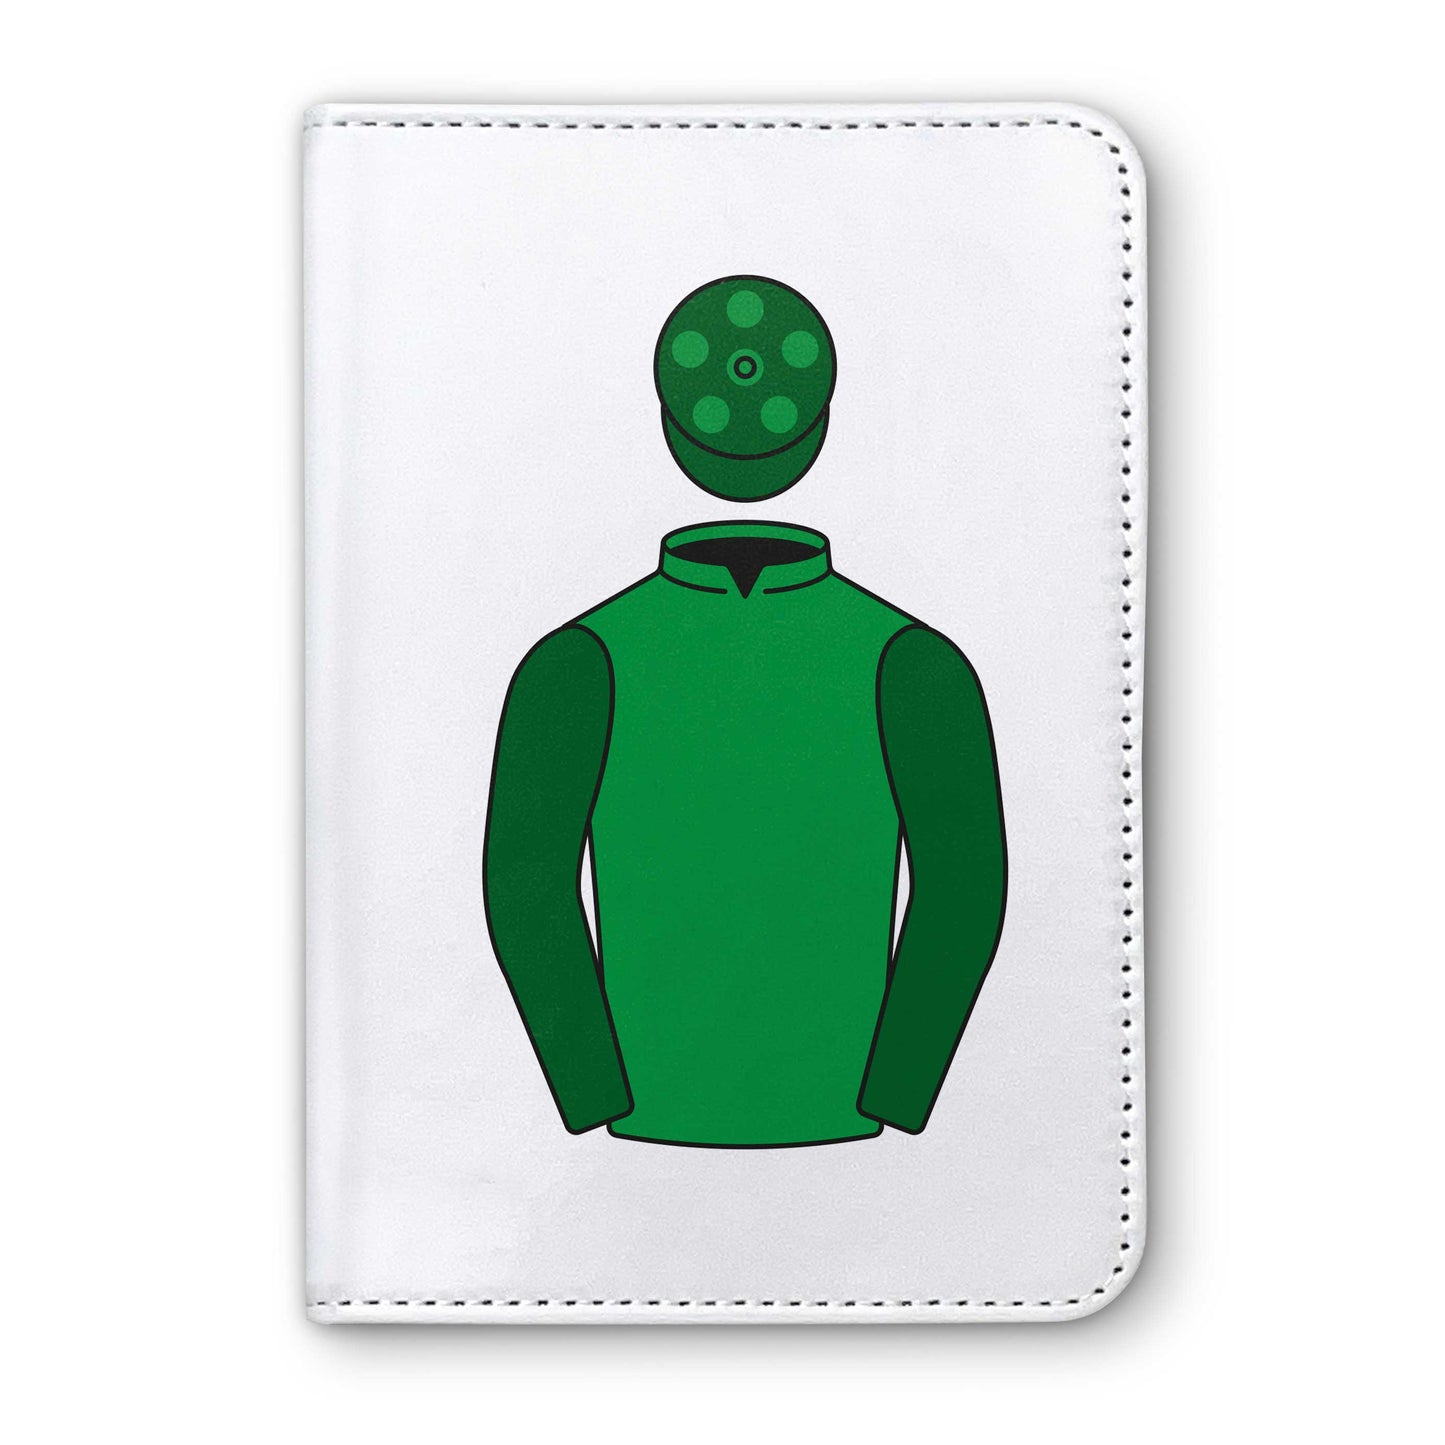 Simon Munir And Isaac Souede Horse Racing Passport Holder - Hacked Up Horse Racing Gifts